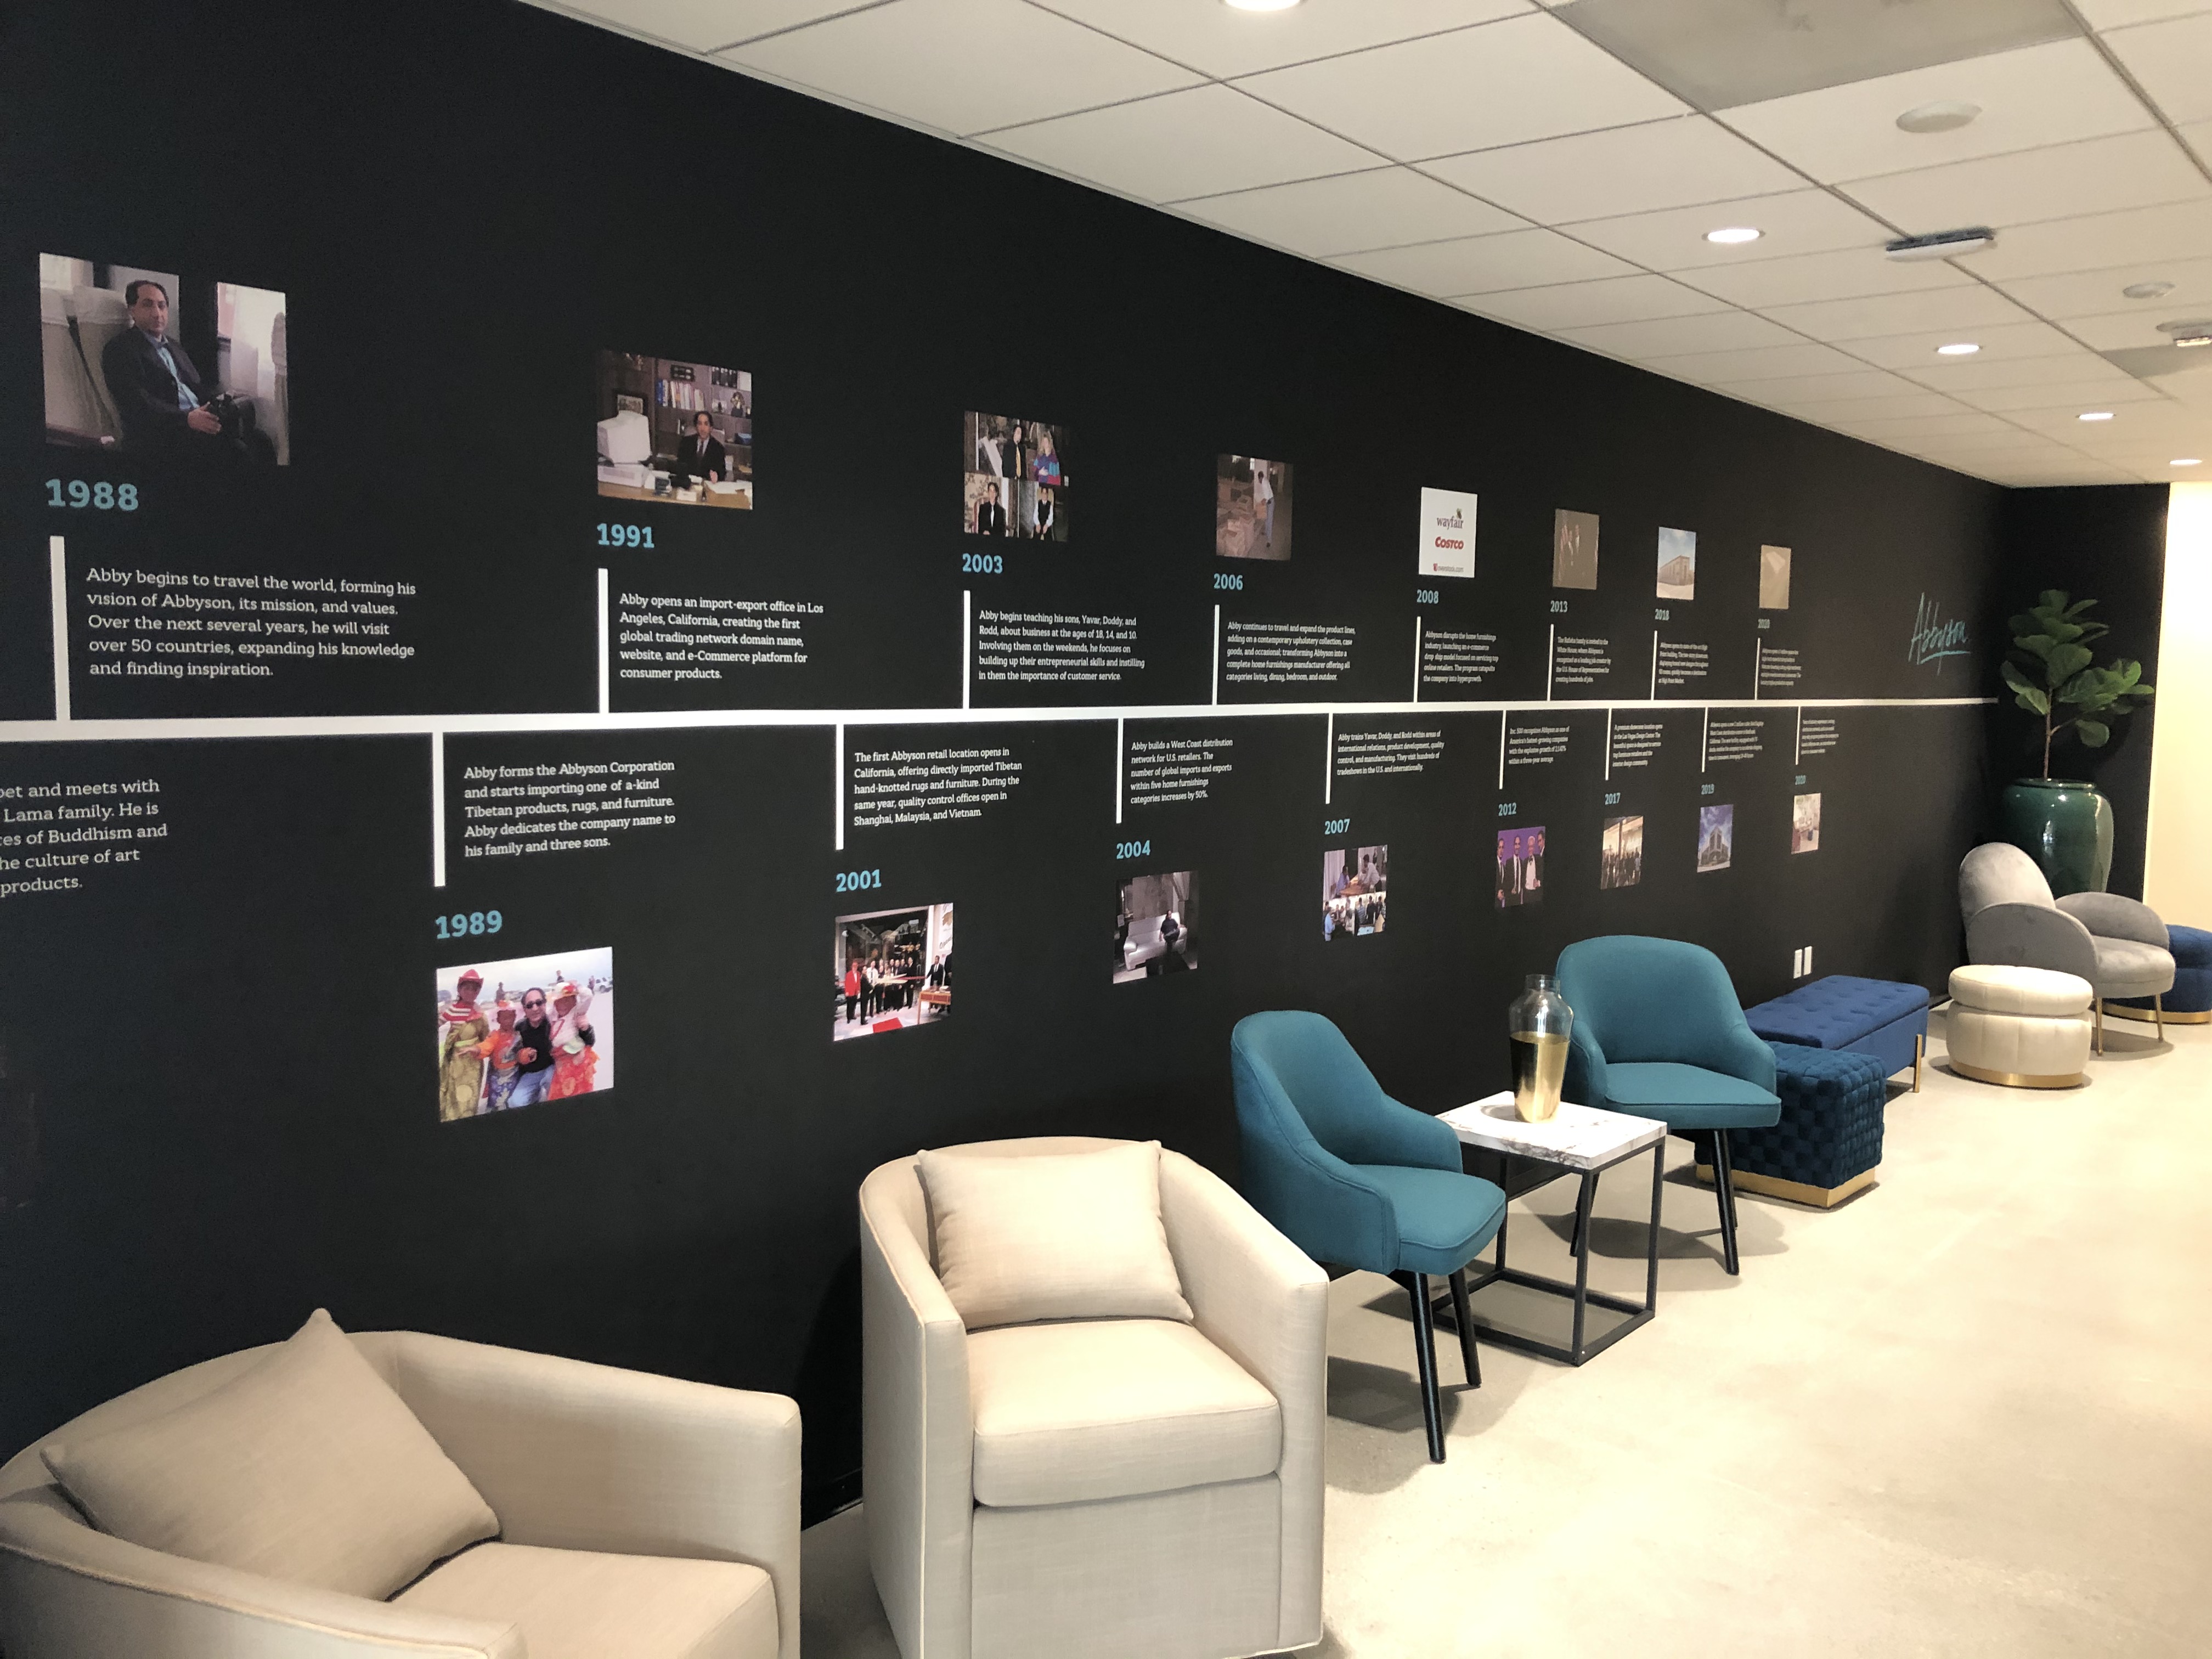 We often mention conveying brand identity through signage. Timeline wall graphics are a great way to do this, like with Abbyson's office in Woodland Hills.